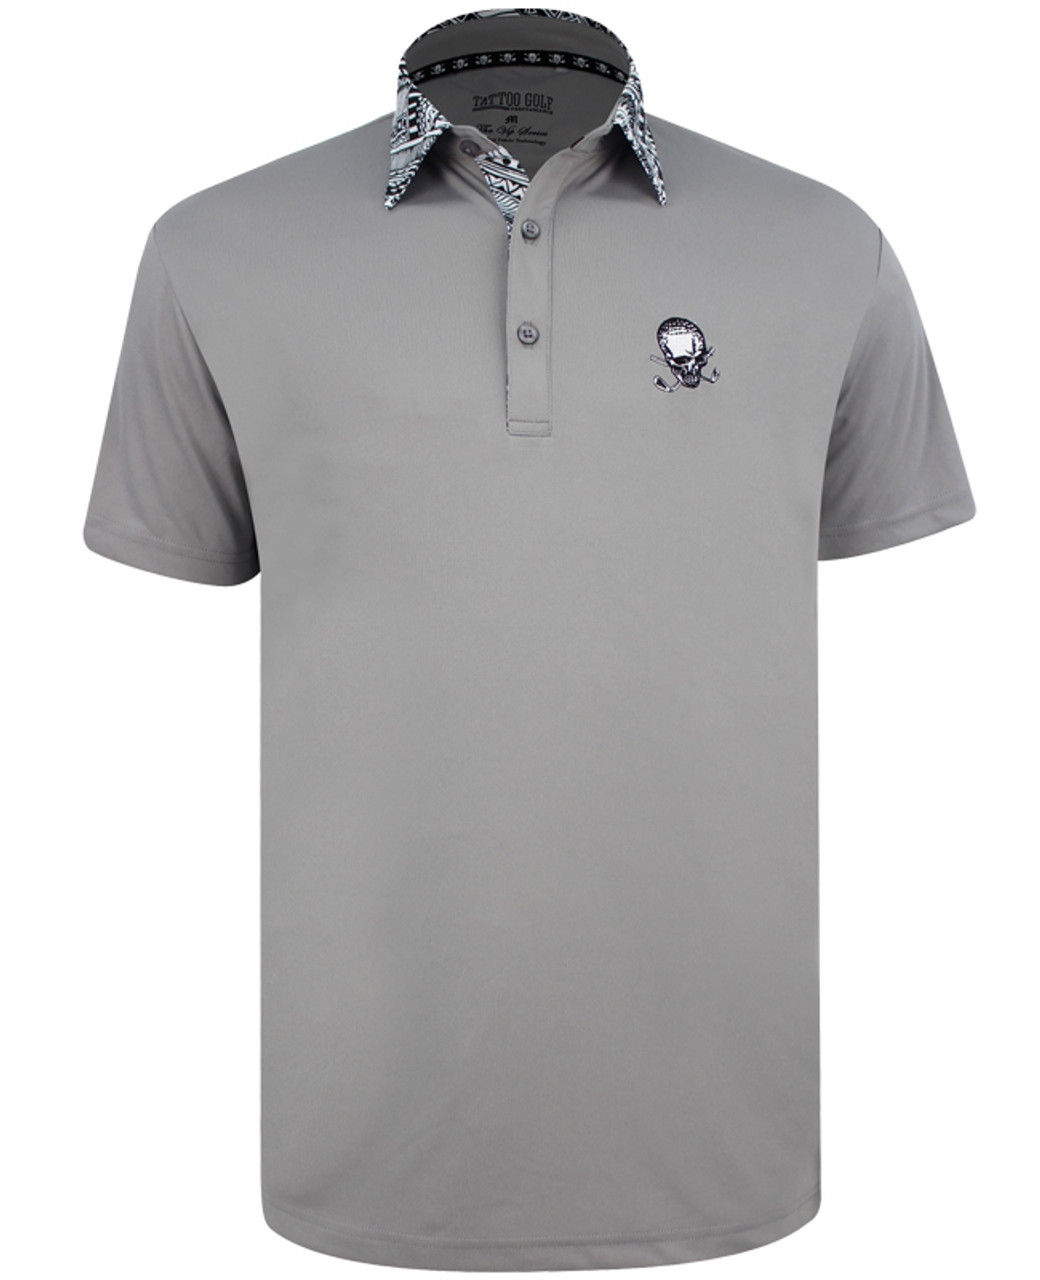 Golf Shirts For Men - Classic and New Styles